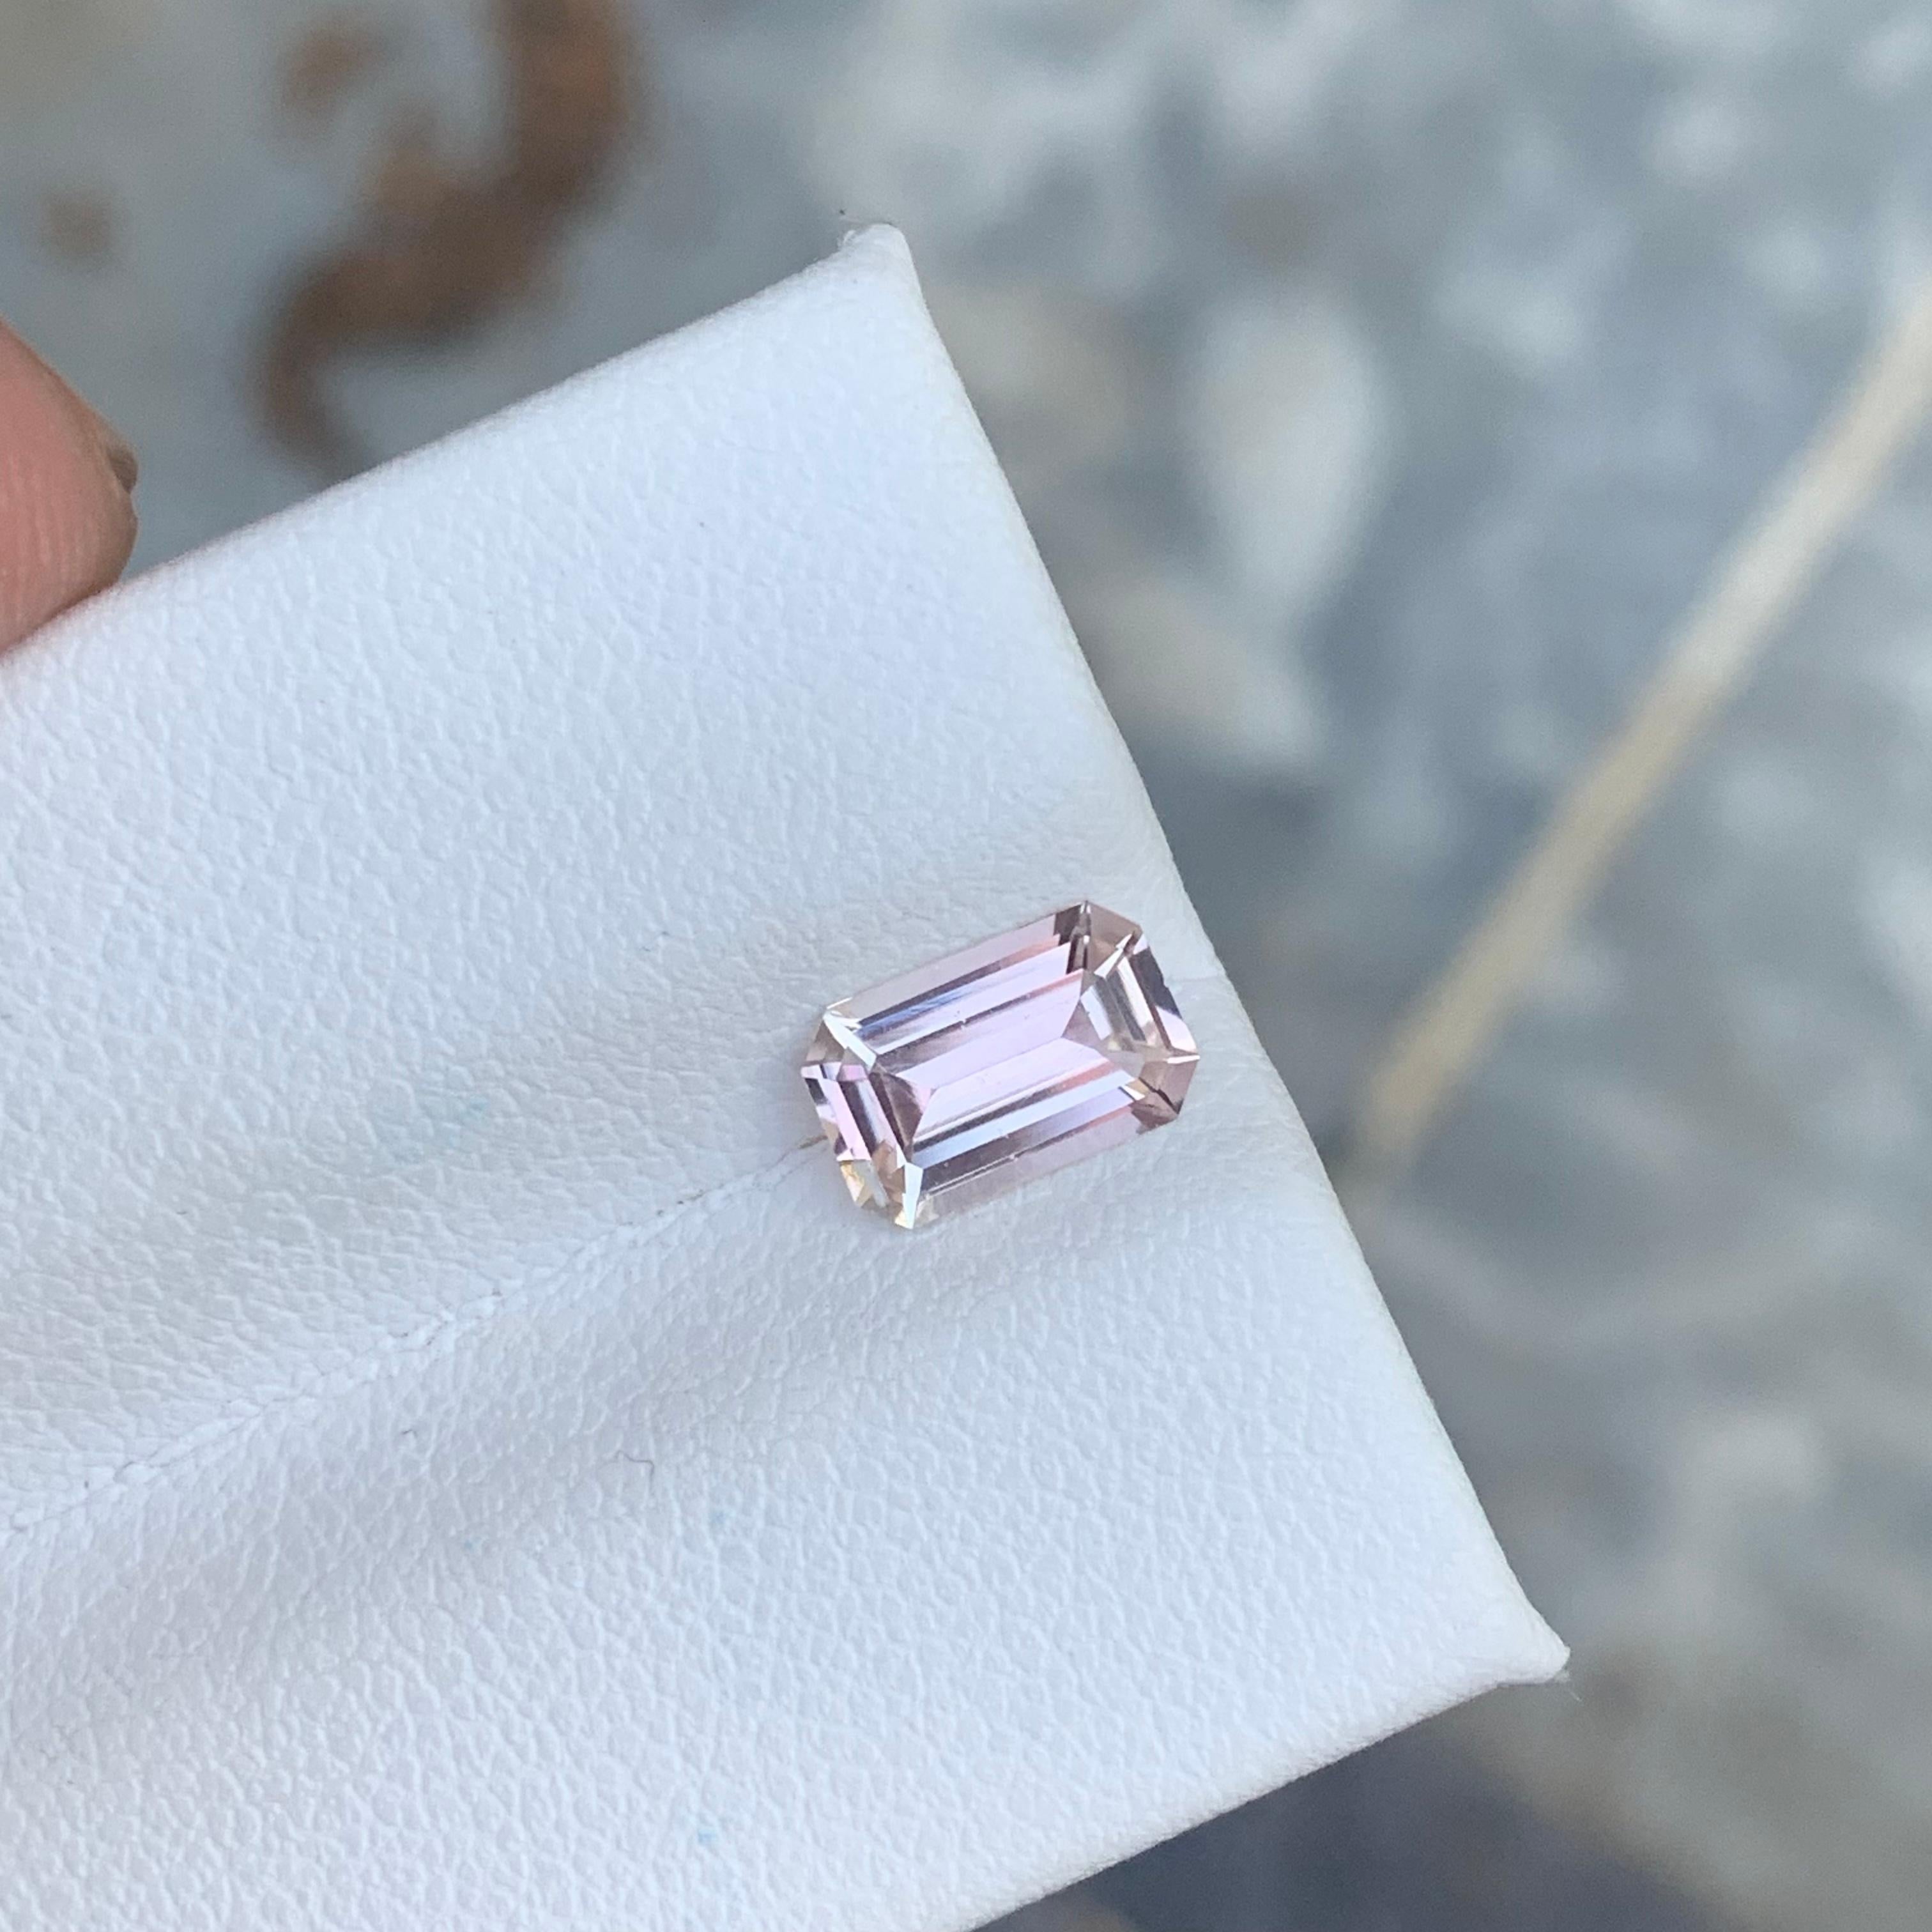 Emerald Cut 1.10 Carats Natural Loose Pale Pink Tourmaline Gemstone Emerald Shaped For Sale